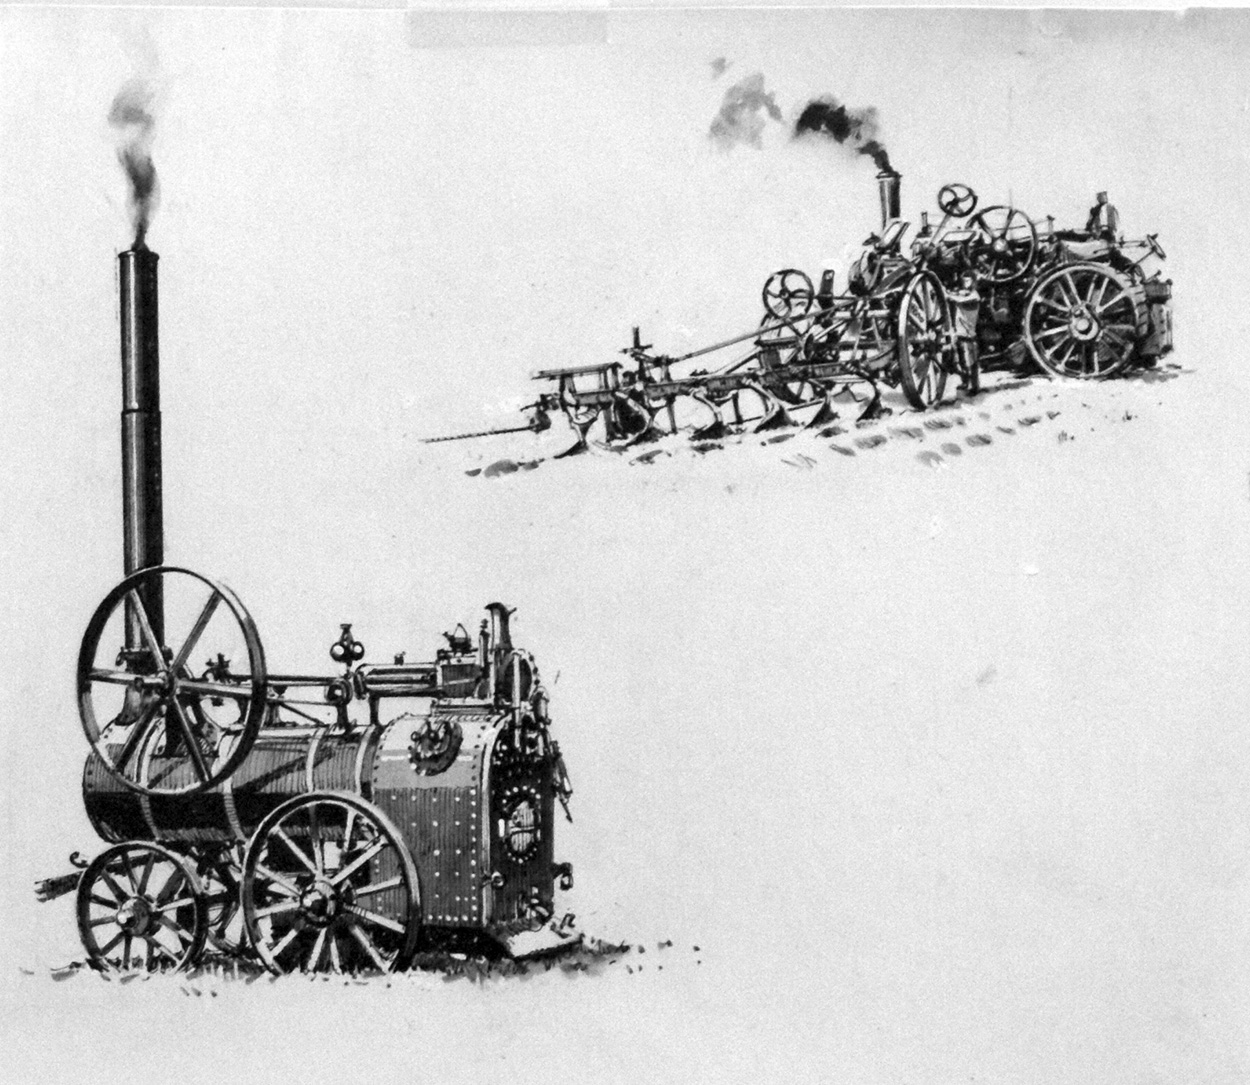 Traction Steam Engine (Original) art by John S Smith Art at The Illustration Art Gallery